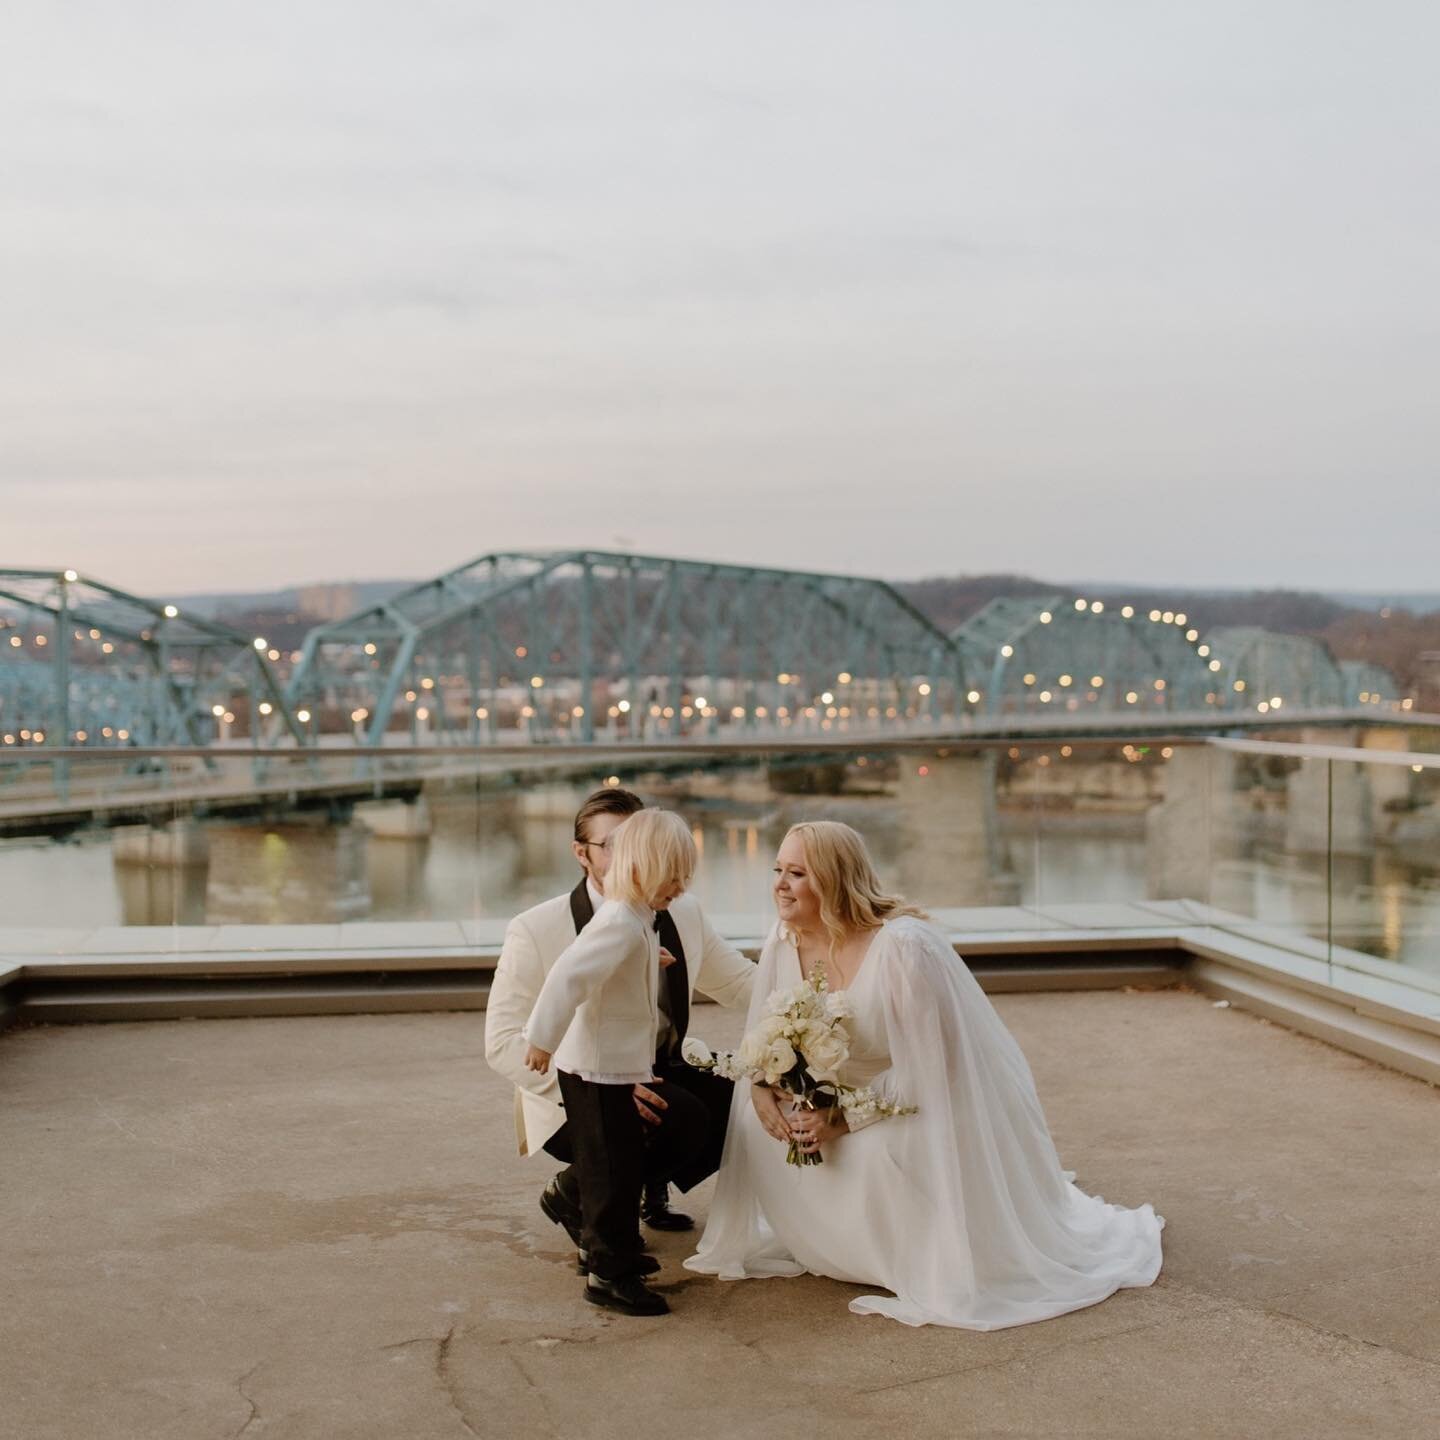 Saturday&rsquo;s elopement in Chattanooga with Mikayla and Samuel was nothing but perfect :&rsquo;) We spent the day walking around the art district hanging and taking pics, watched them say their vows in front of a twinkling bridge, and then went to